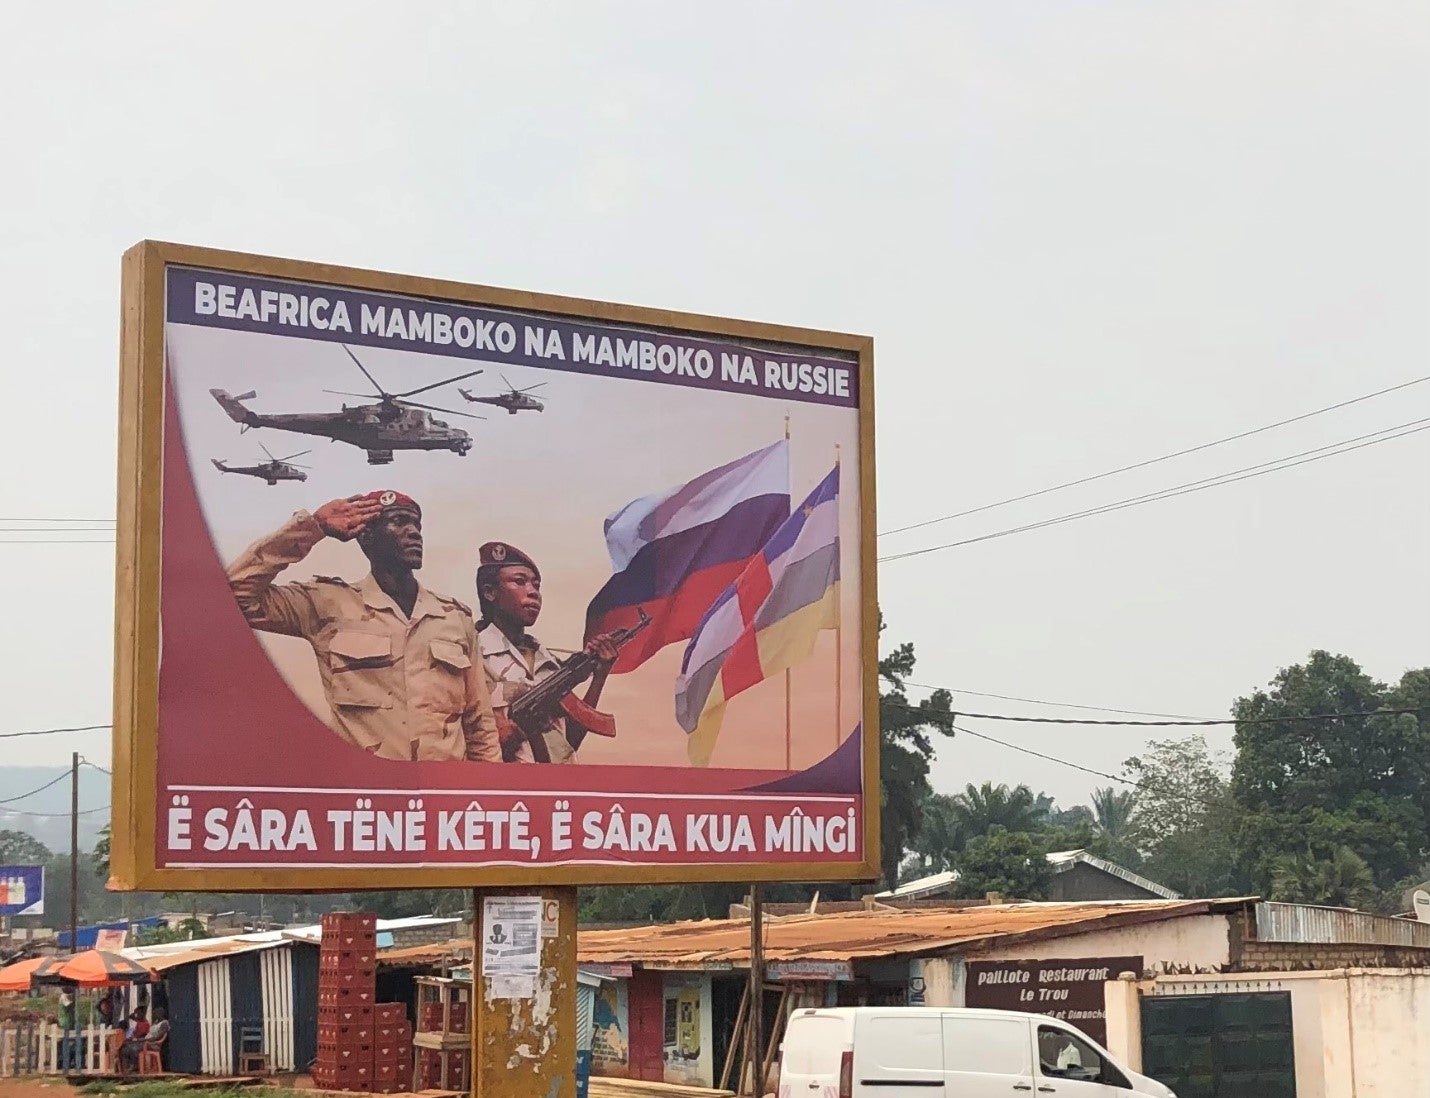 A billboard in the capital, Bangui advertising cooperation between Russia and the Central African Republic. The translation from Sango reads: “The Central African Republic hand in hand with Russia. Talk little, work much.” 